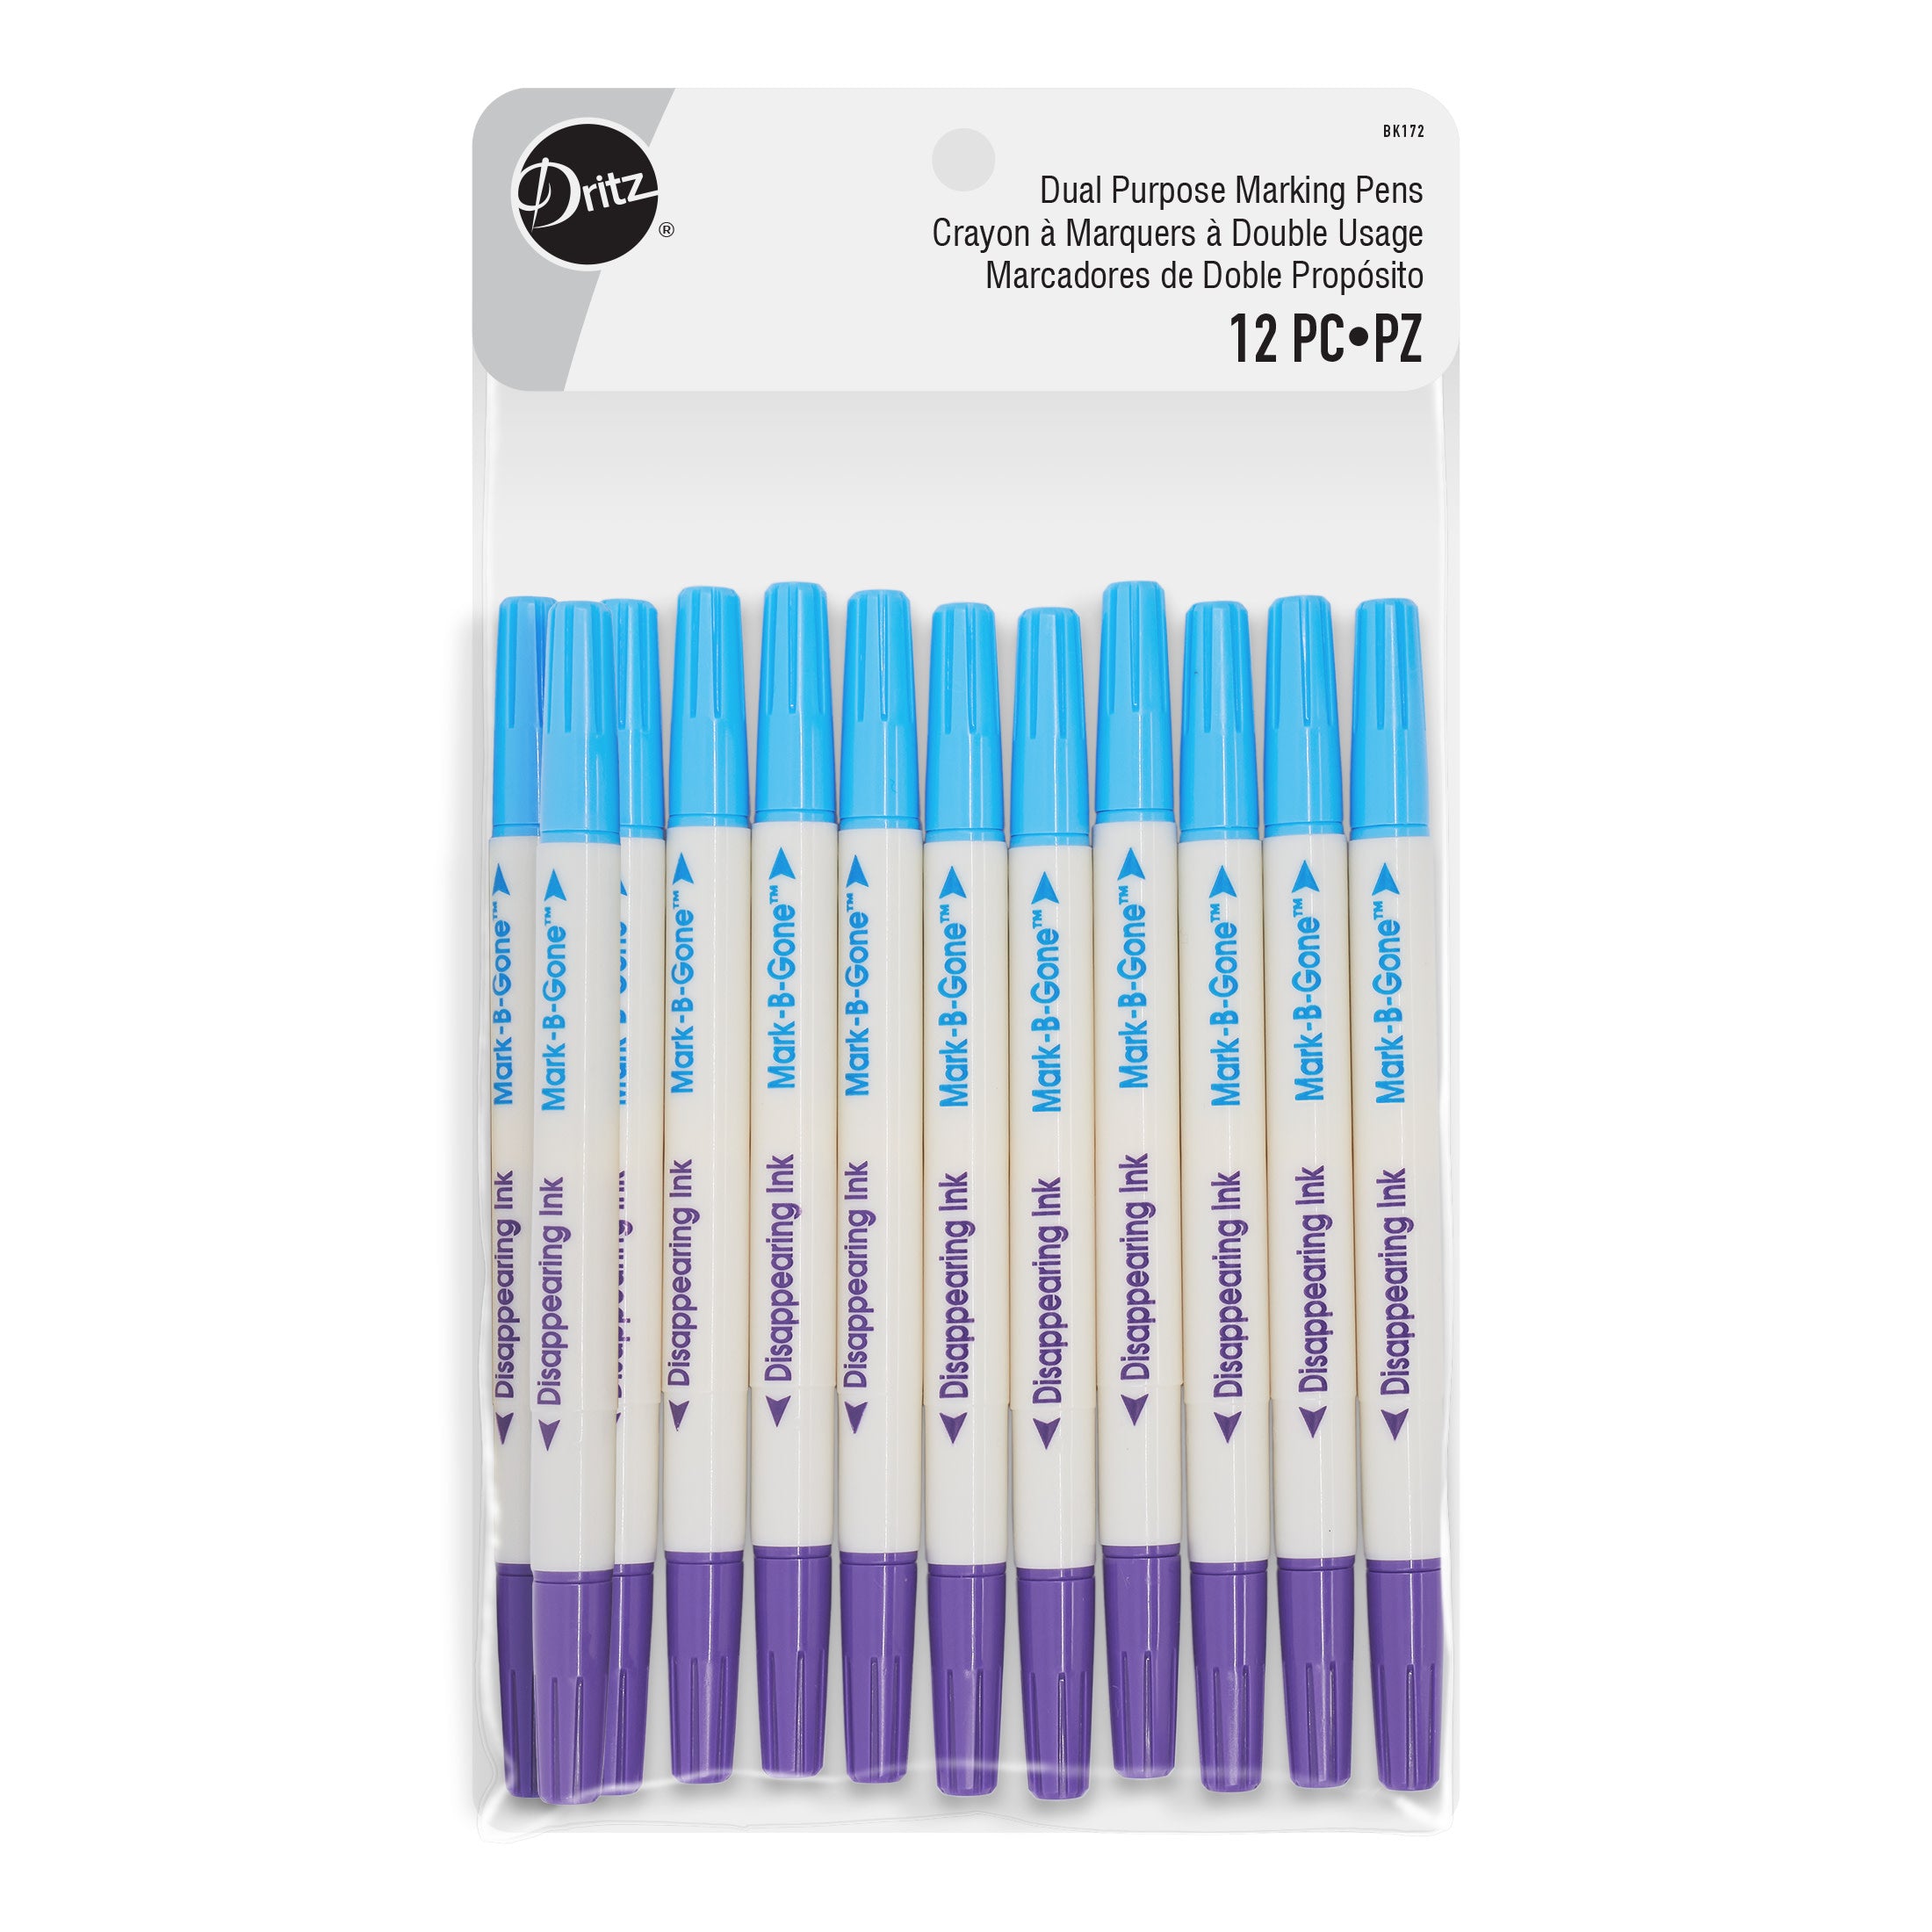 Dritz Dual Purpose Marking Pens, Mark-B-Gone & Disappearing Ink, 12 PC